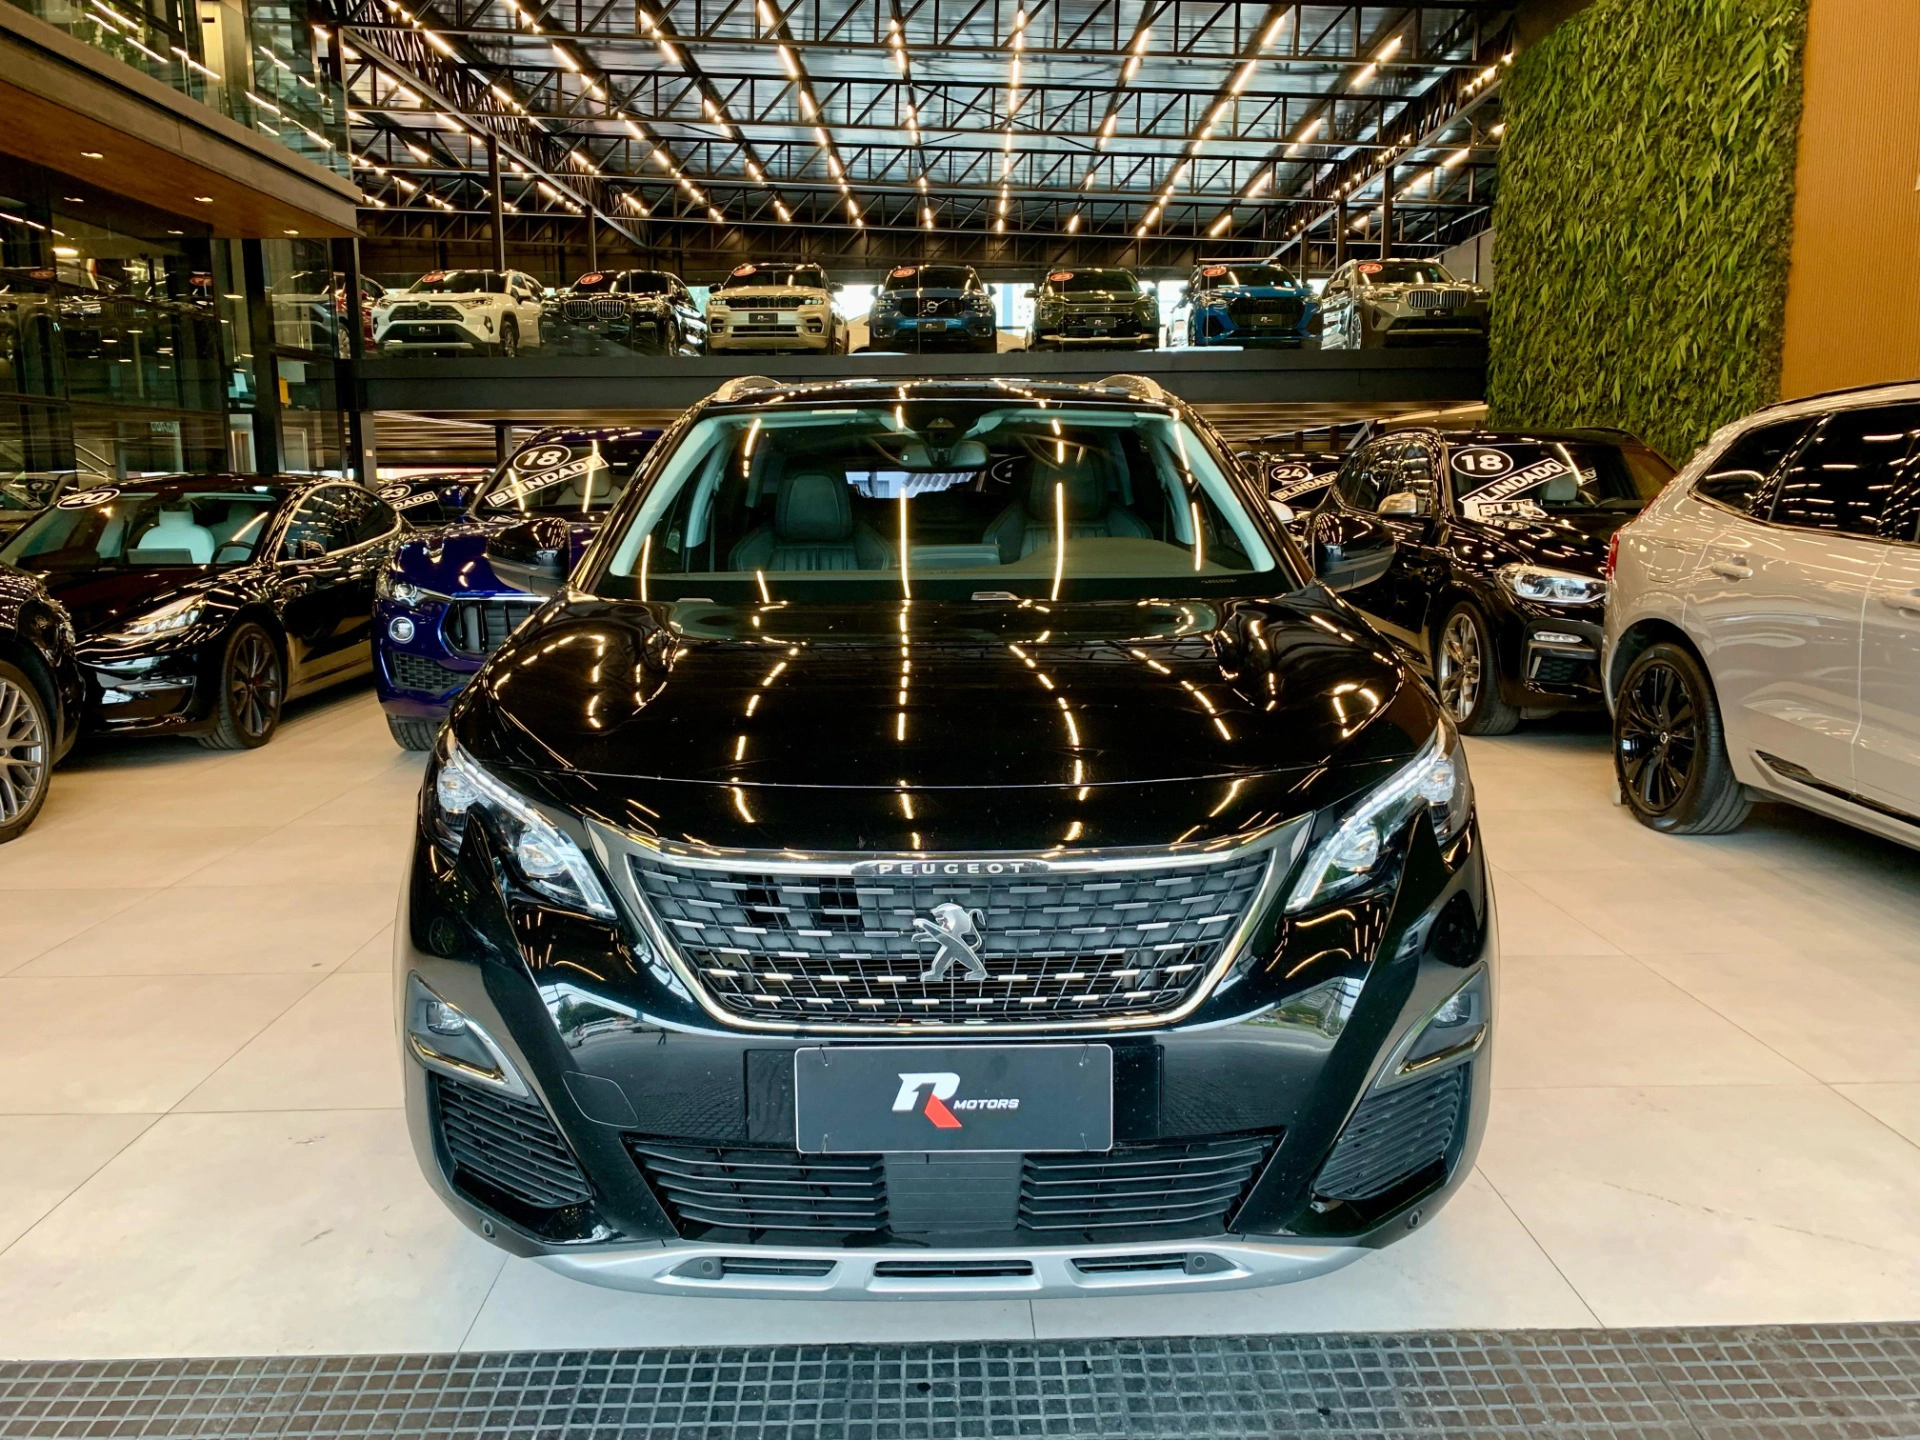 peugeot 3008 1.6 GRIFFE PACK THP 16V GASOLINA 4P AUTOMÁTICO 2020